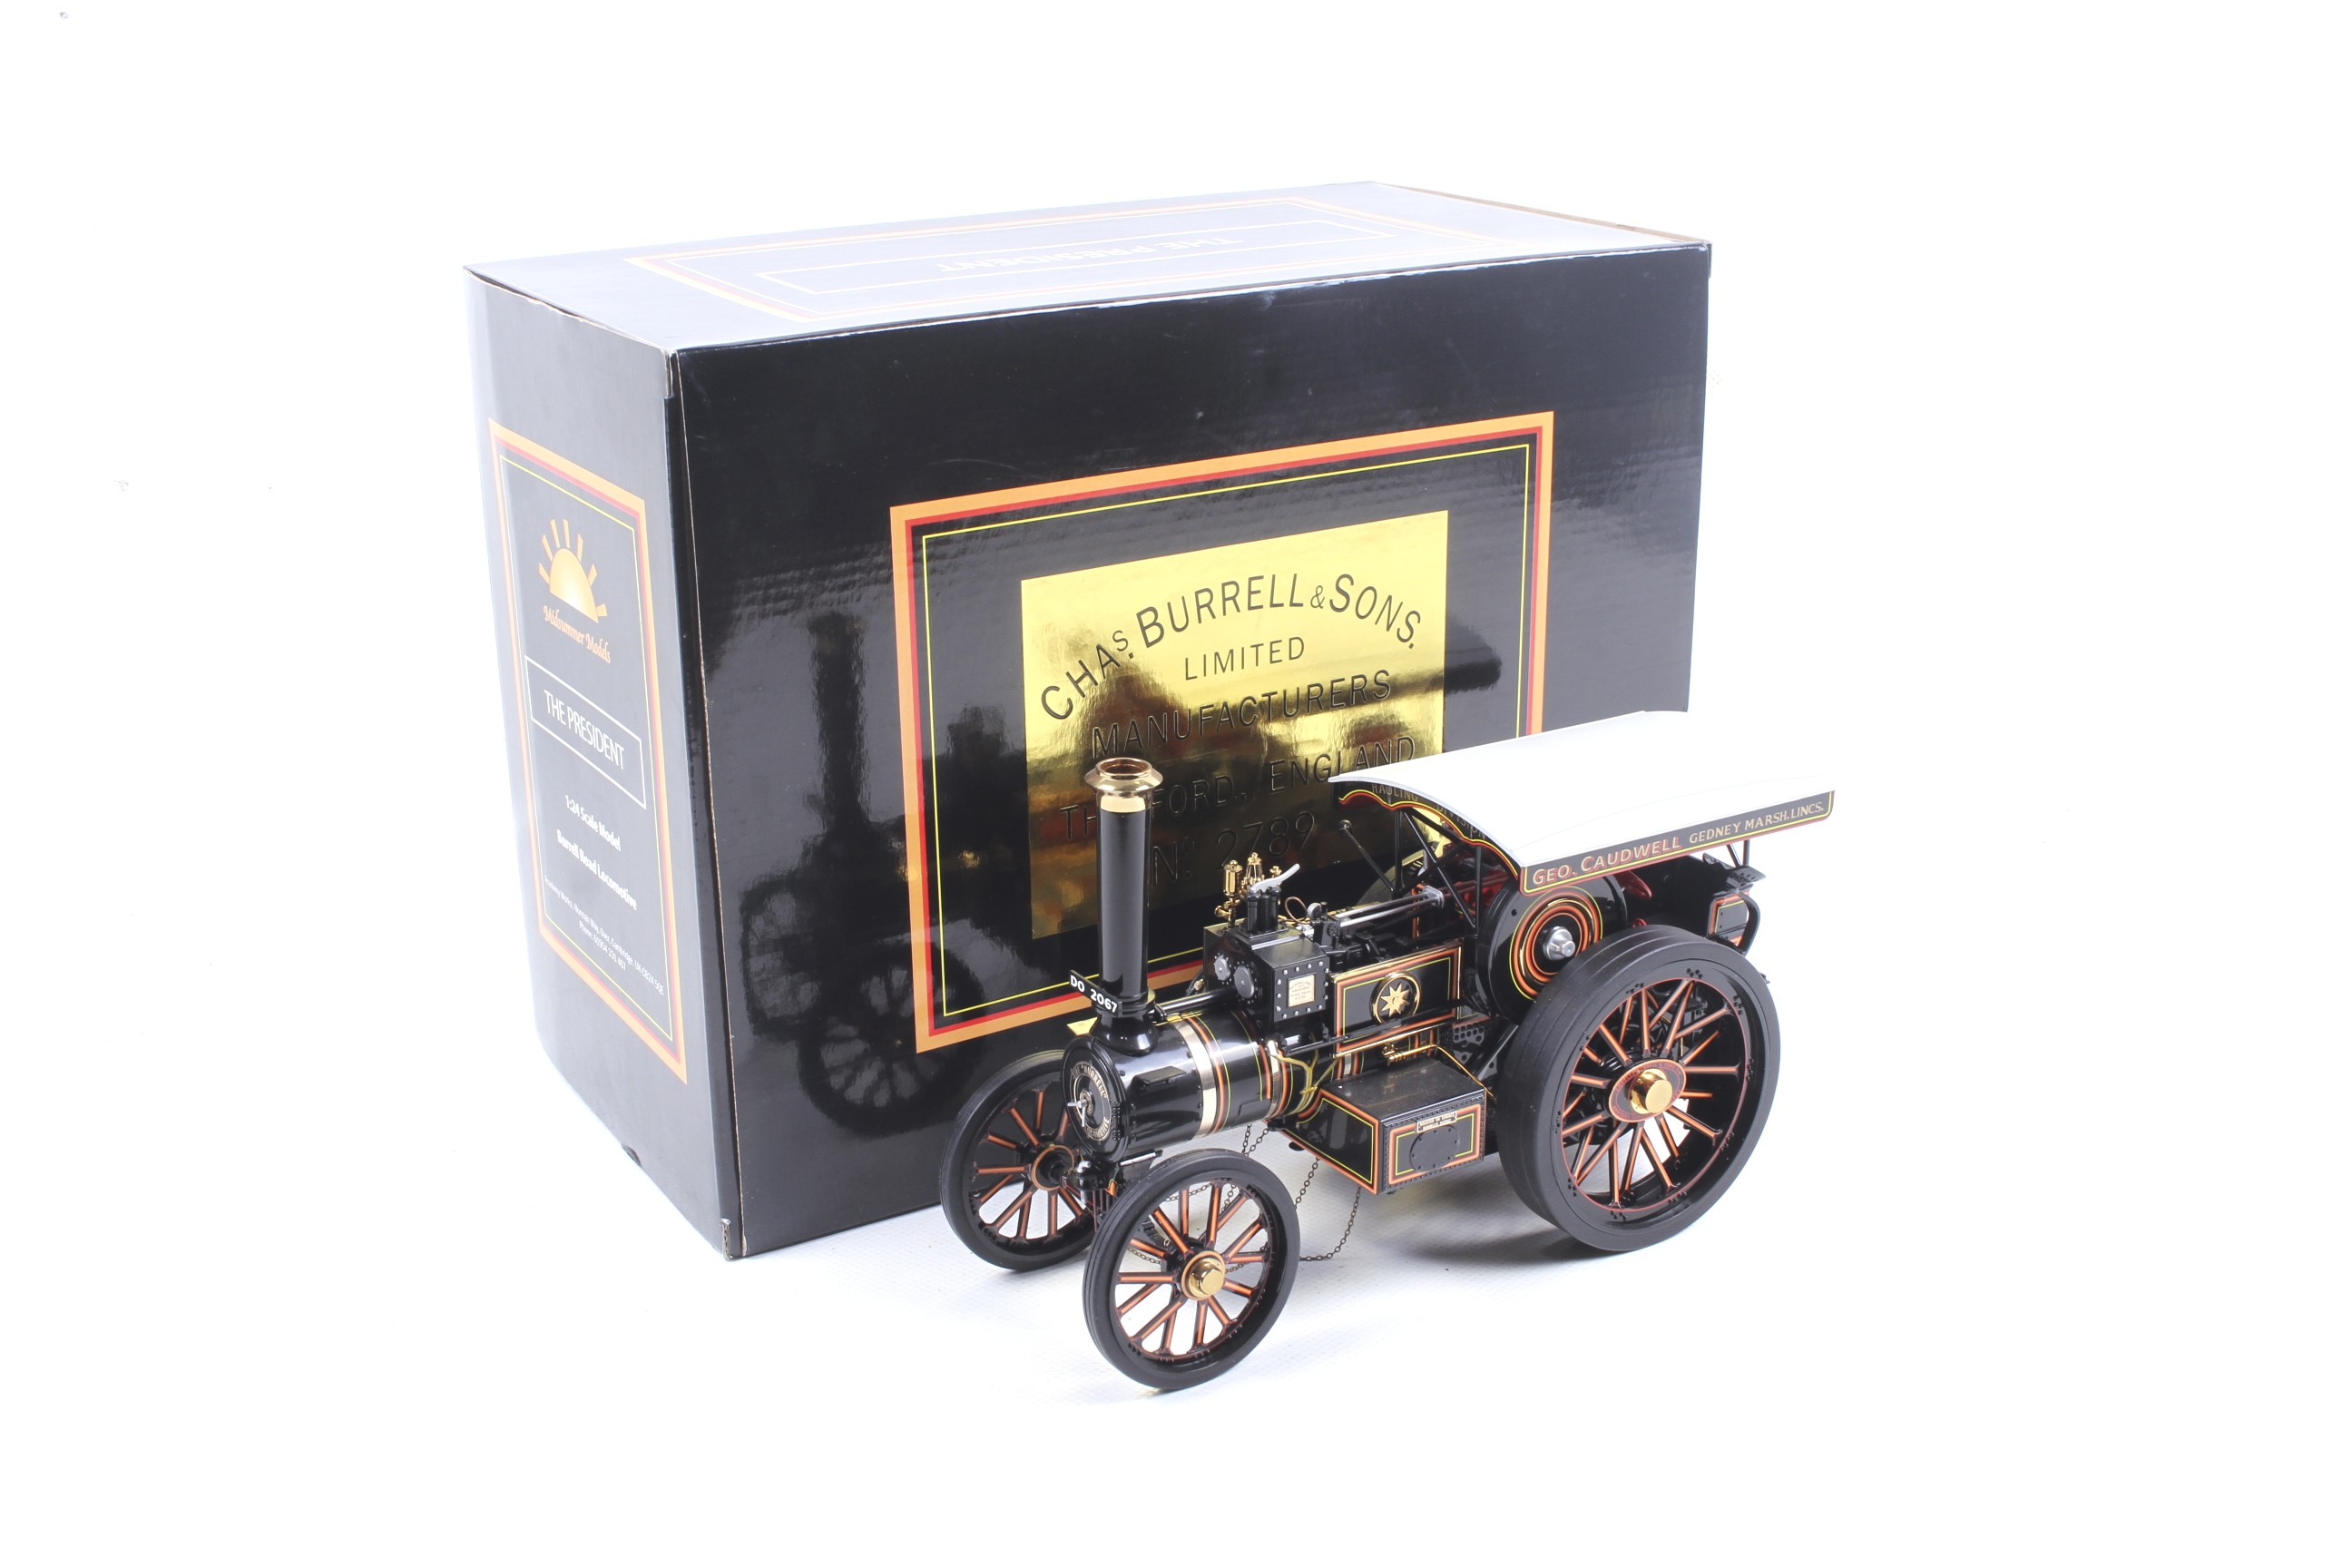 A Midsummer Models 'The President' 1:24 scale burrell road locomotive.